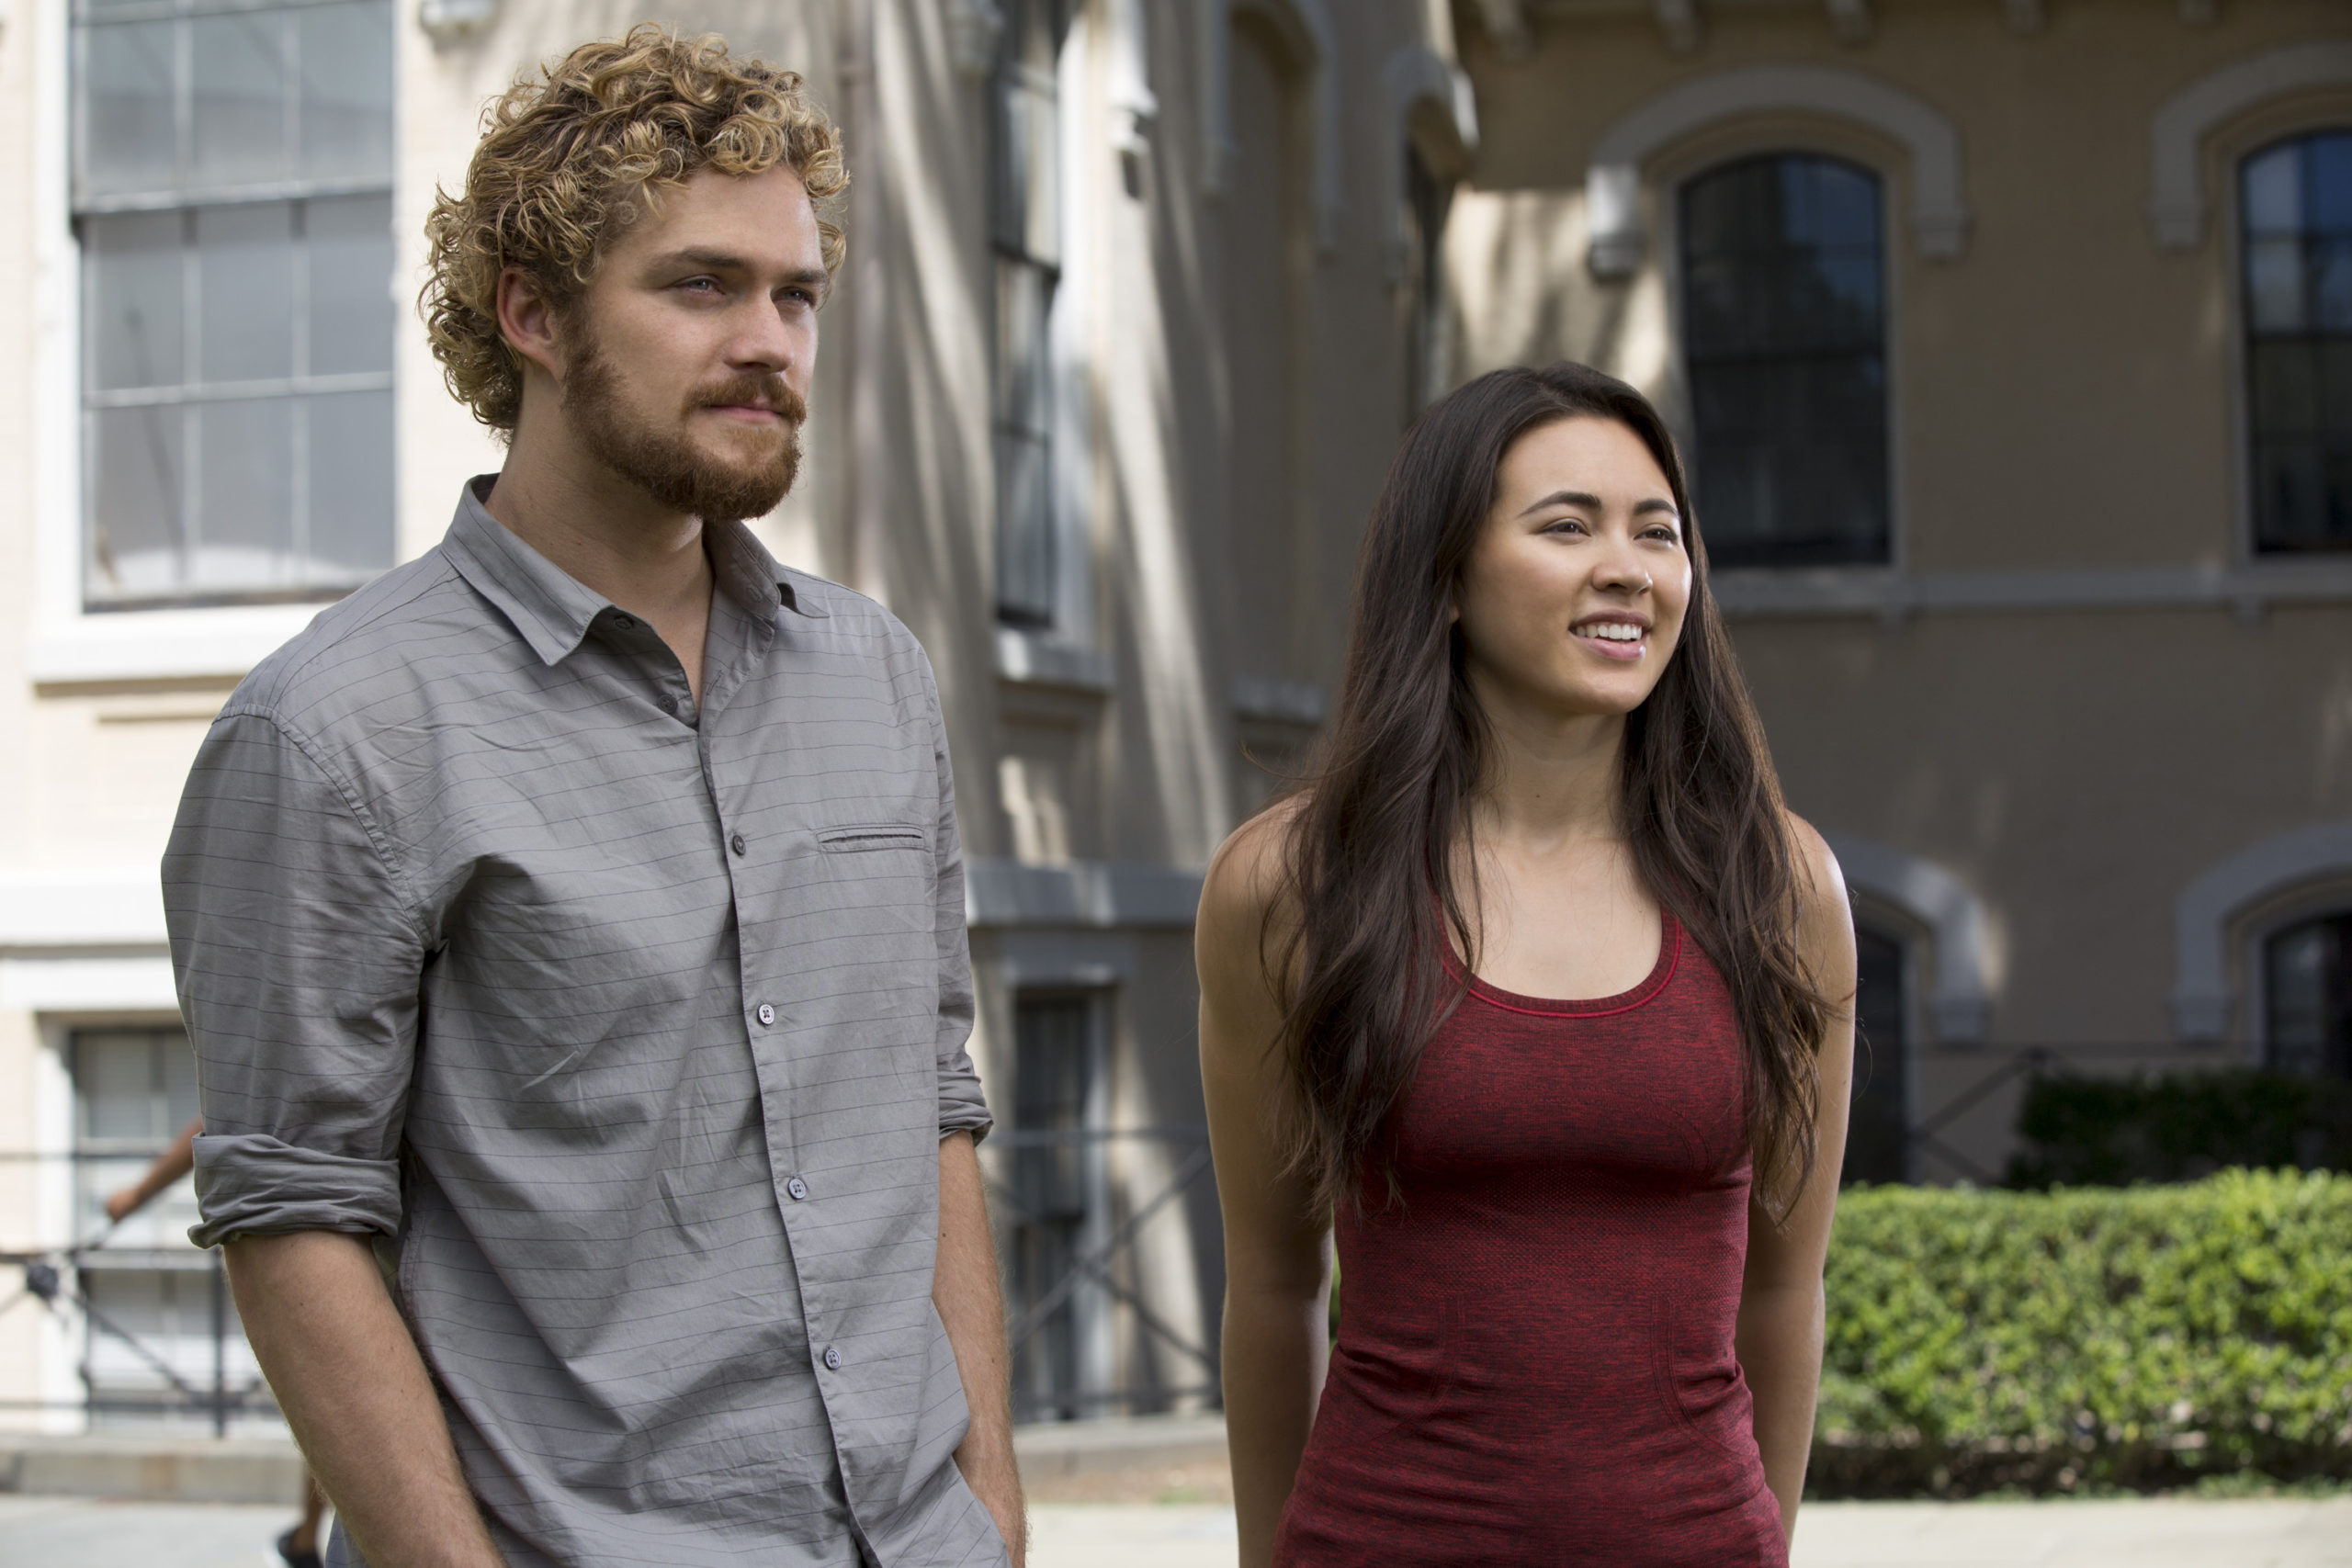 10 things we learned from the cast of Iron Fist, News & Features